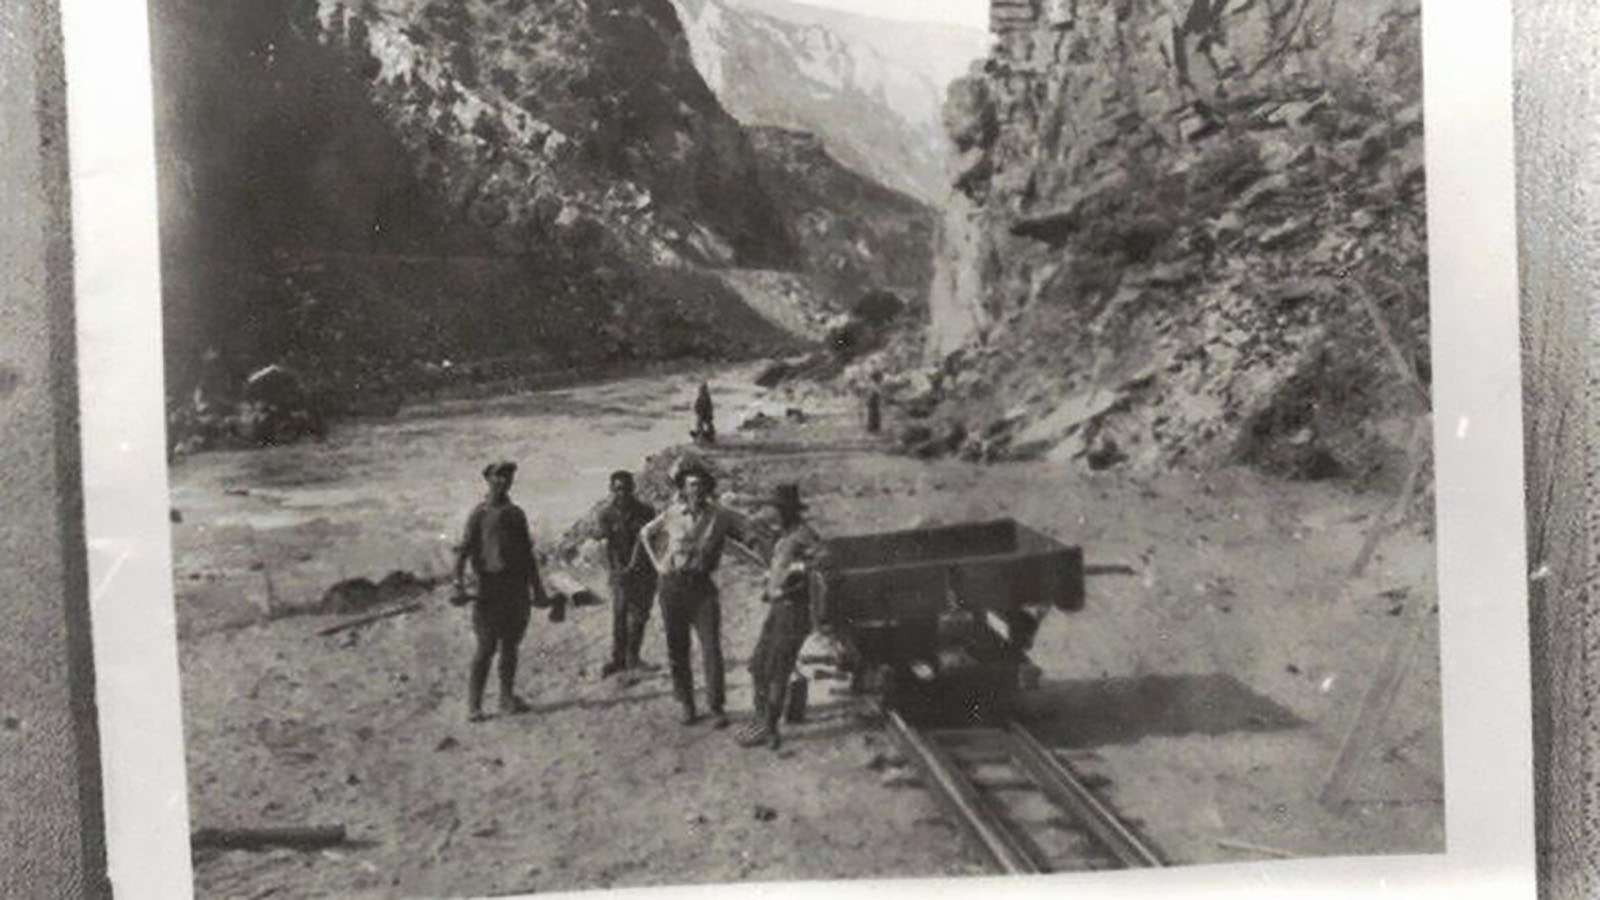 Yellowstoen Highway in Wind River Canyon under construction in October 1923.